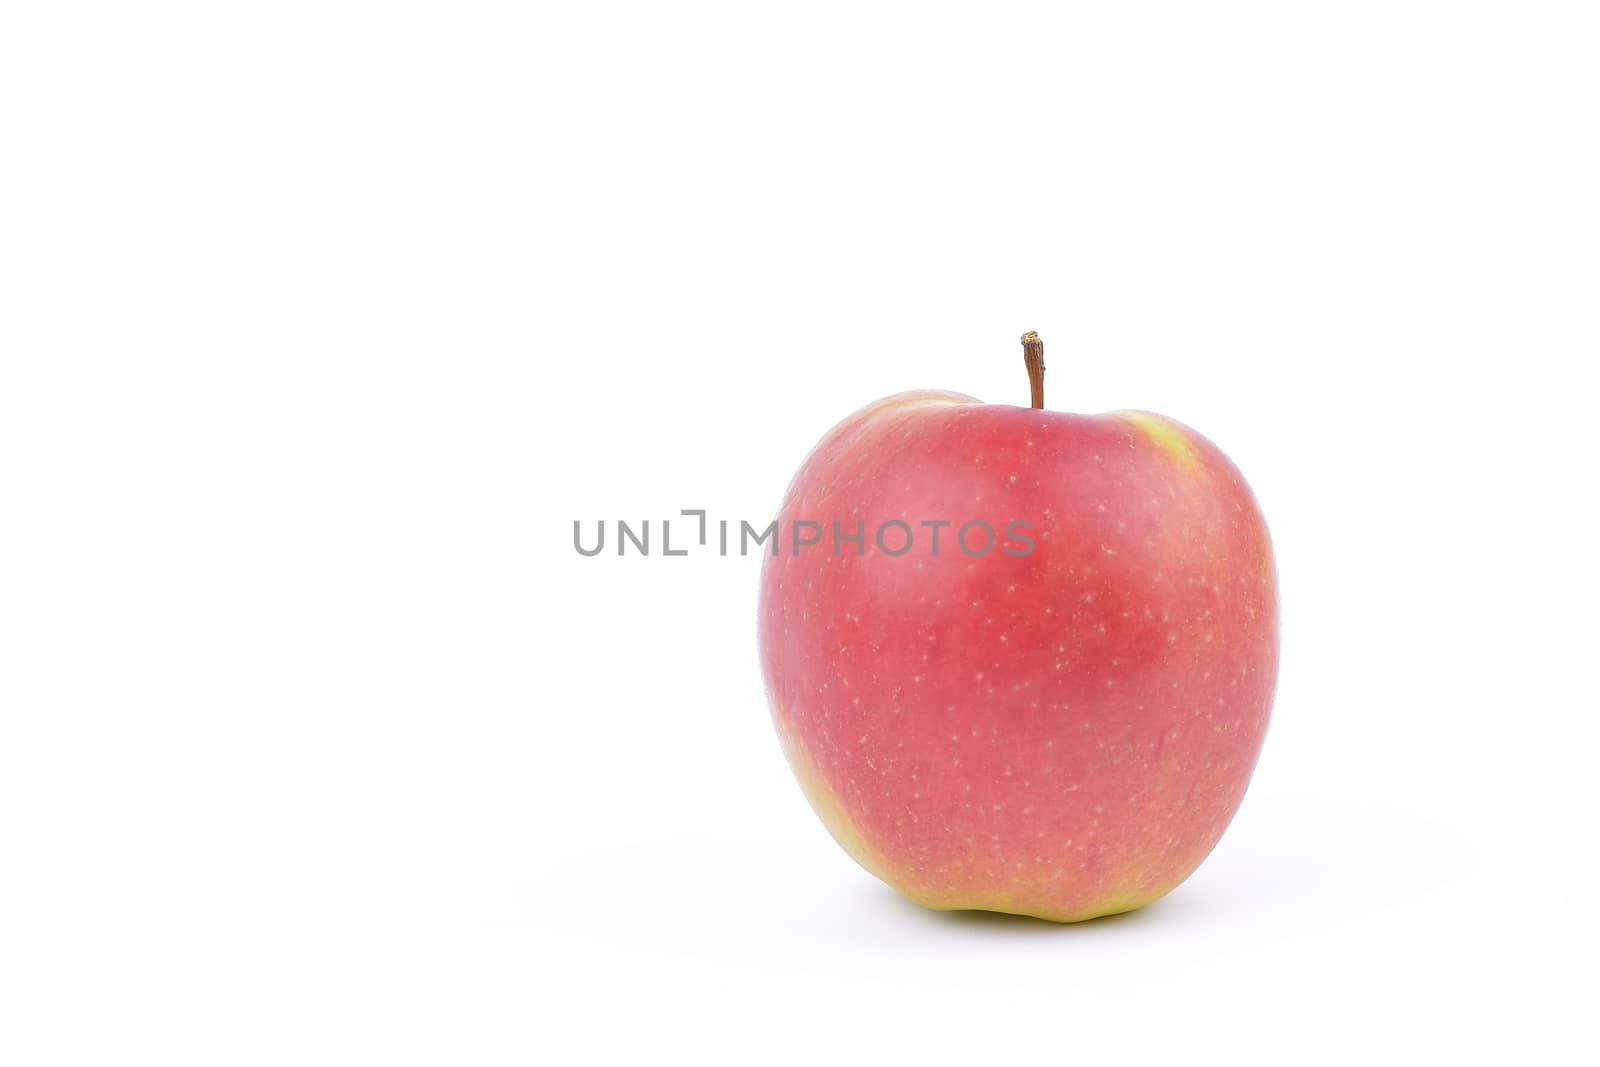 Red apple on a white background.